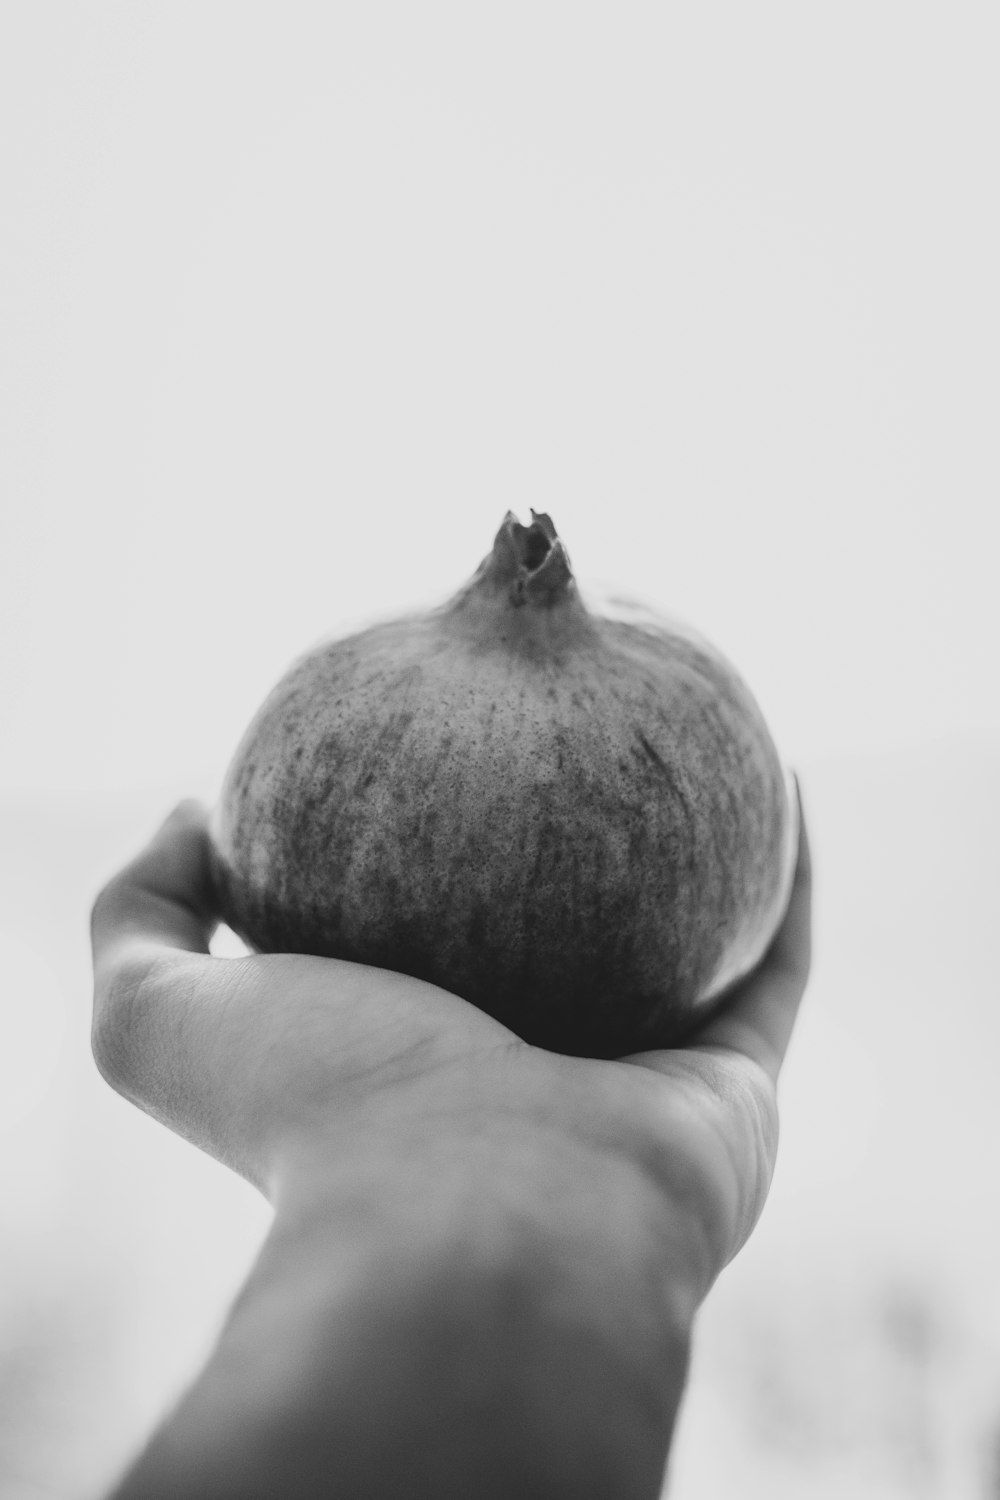 grayscale photo of person holding round fruit